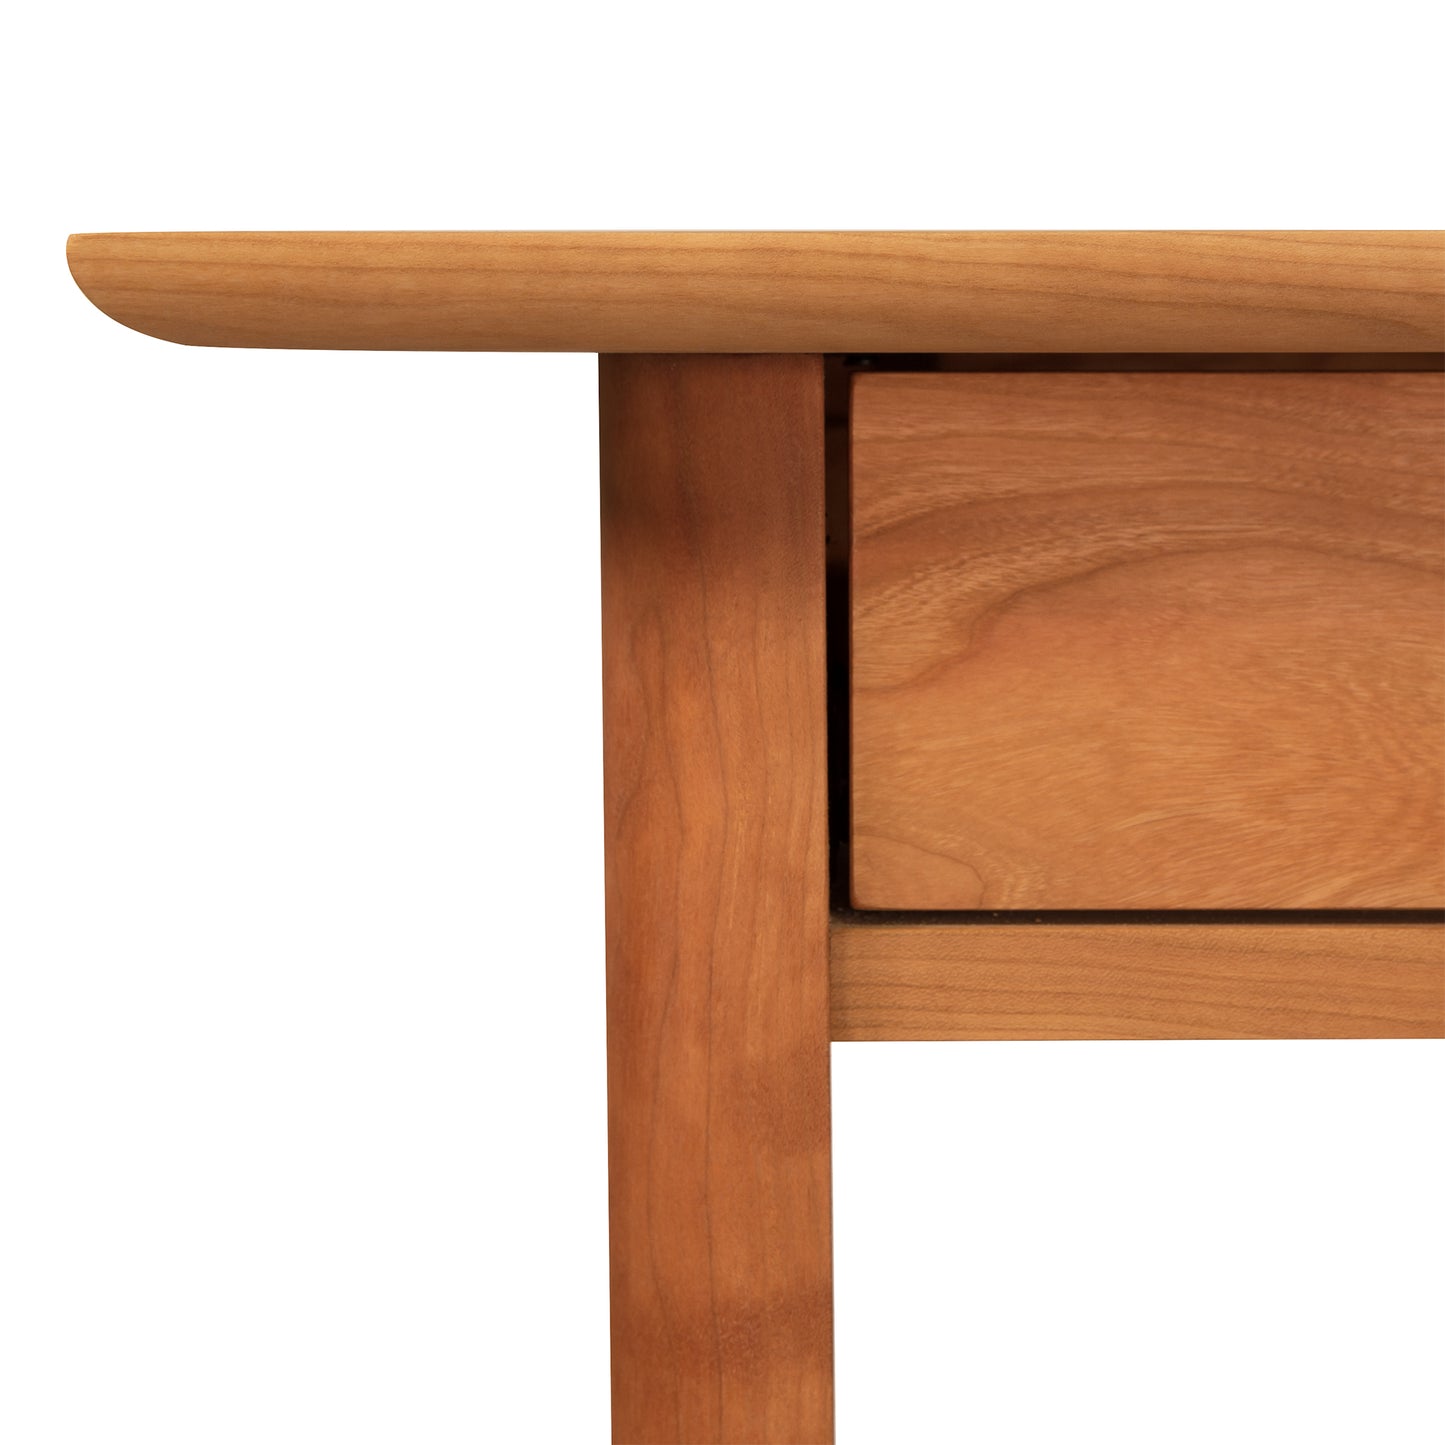 Corner of a Heartwood Shaker Writing Desk by Vermont Furniture Designs with a single drawer, against a white background.